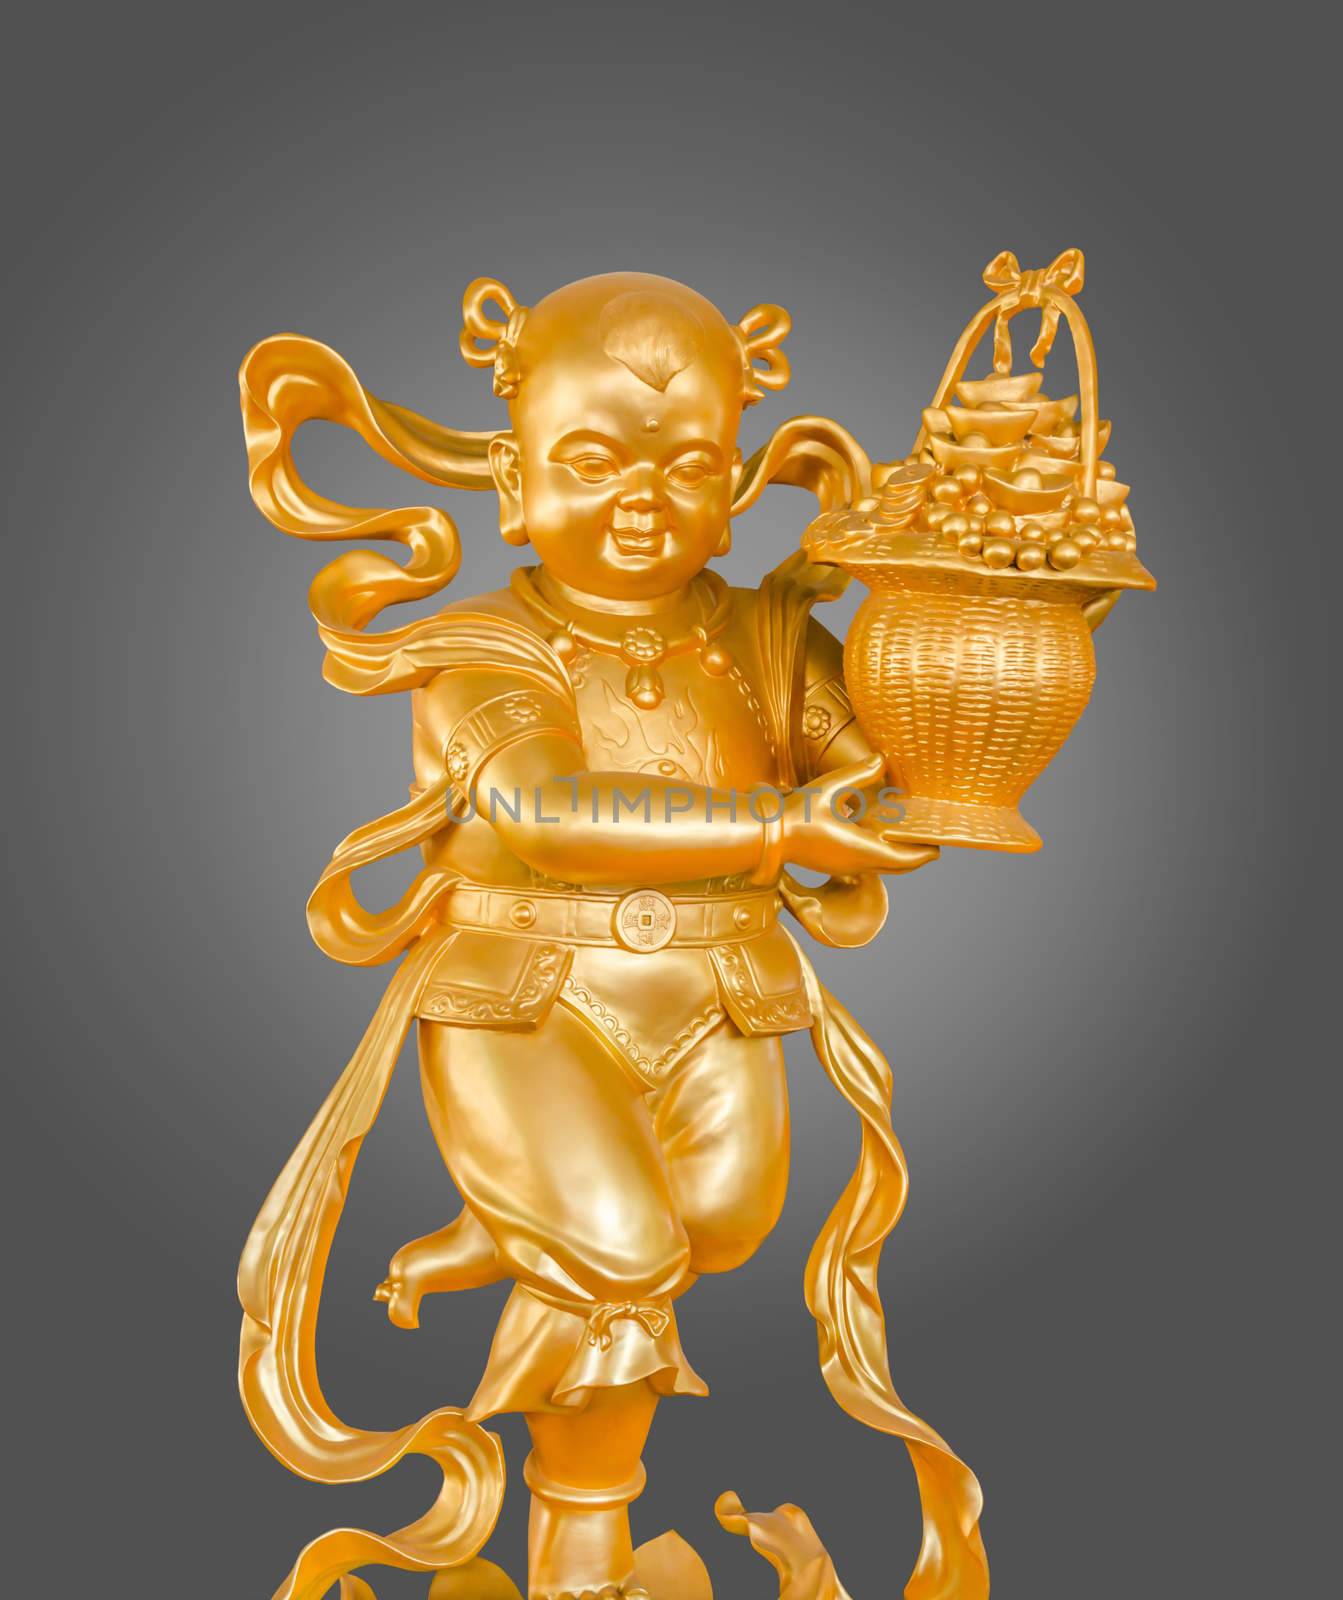 Gold God of Wealth or prosperity (Cai Shen) statue. by Gamjai